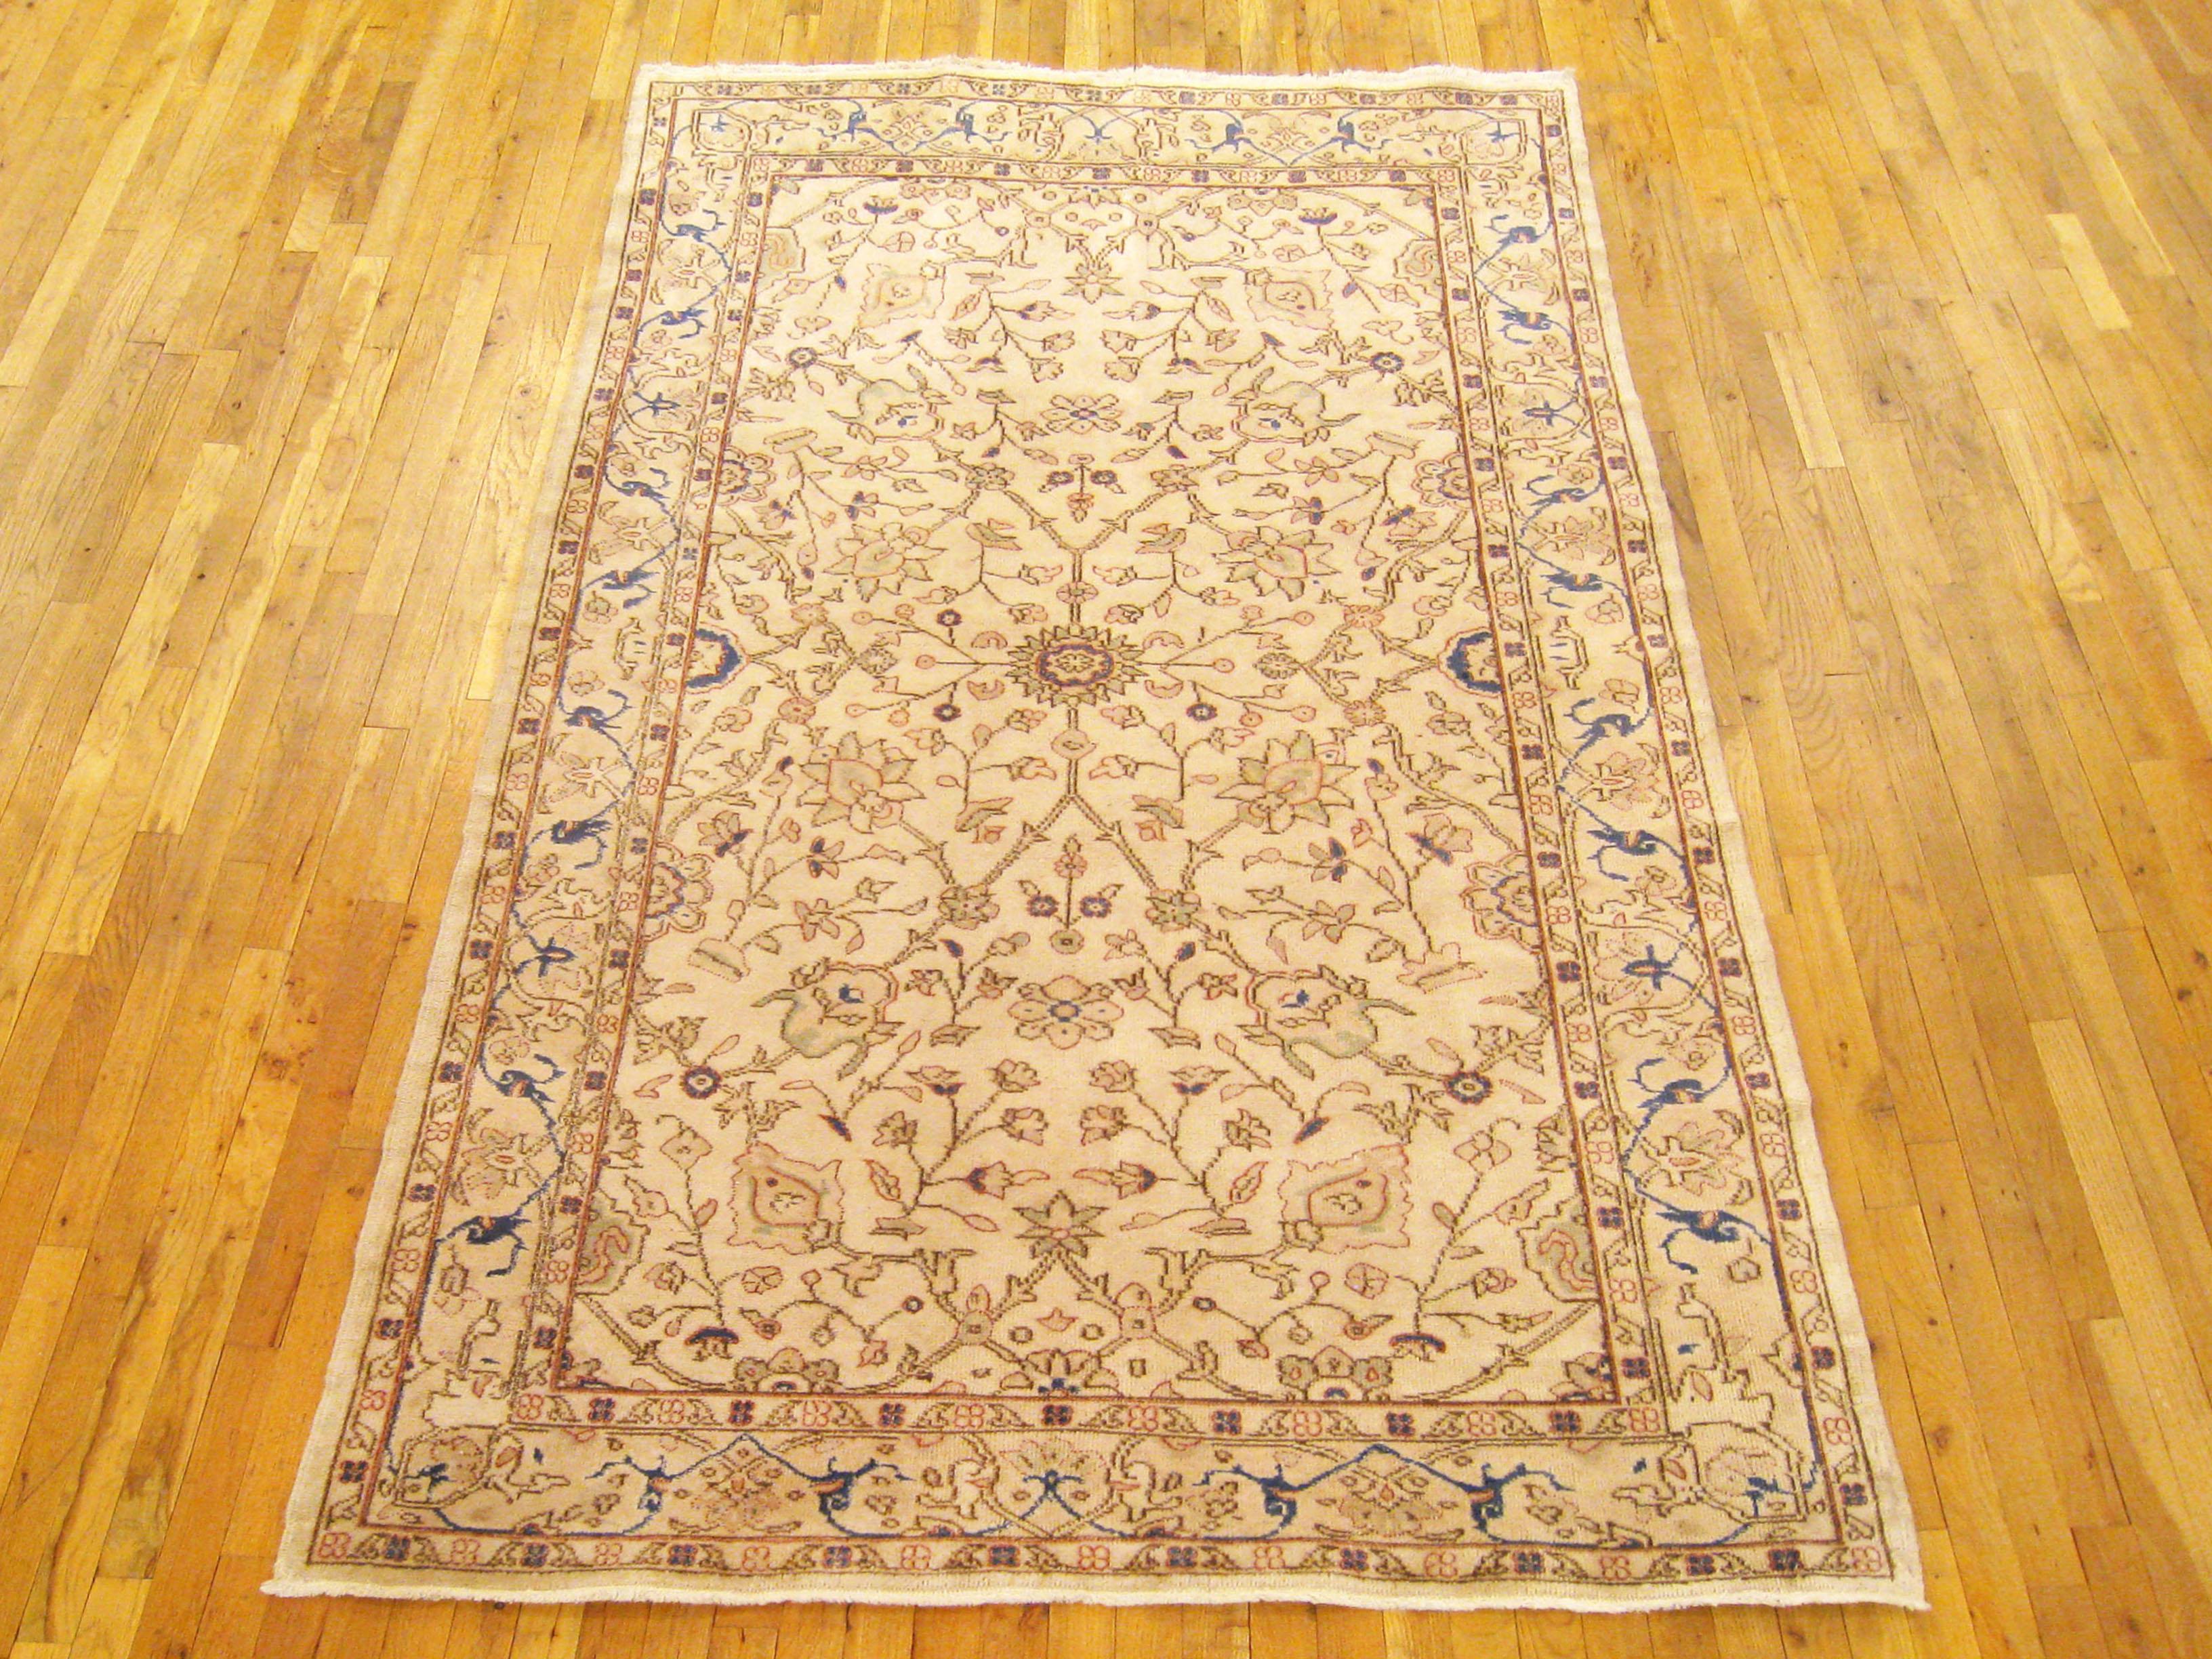 Vintage Turkish Oushak decorative oriental carpet, room size, with Ivory Field

A gorgeous vintage Turkish Oushak carpet, circa 1960, size 8'6